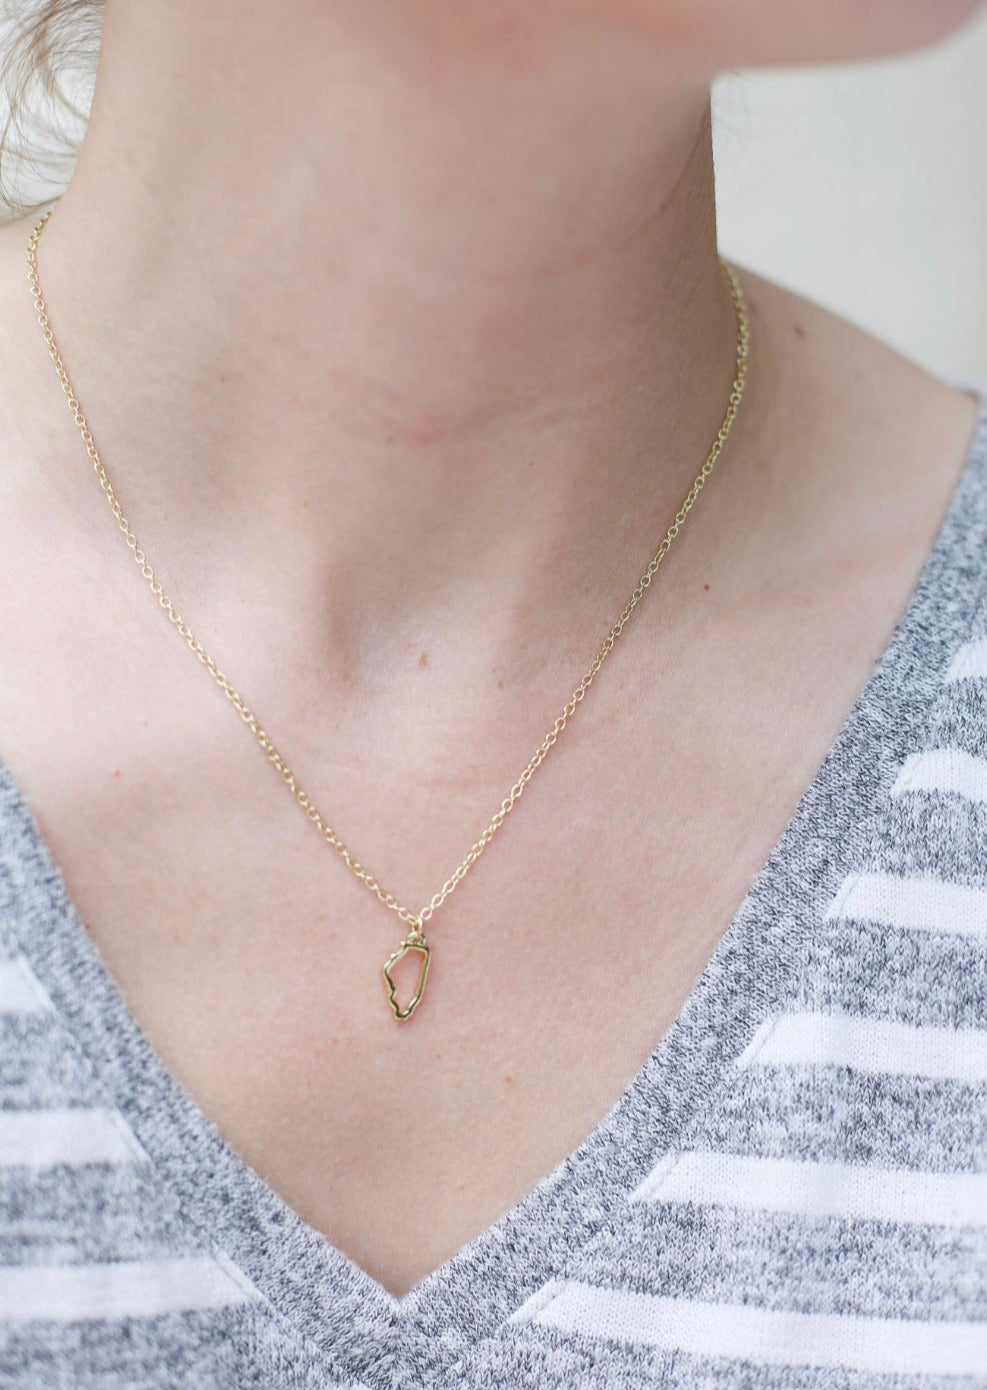 State of Illinois Gold Necklace | Illinois Jewelry